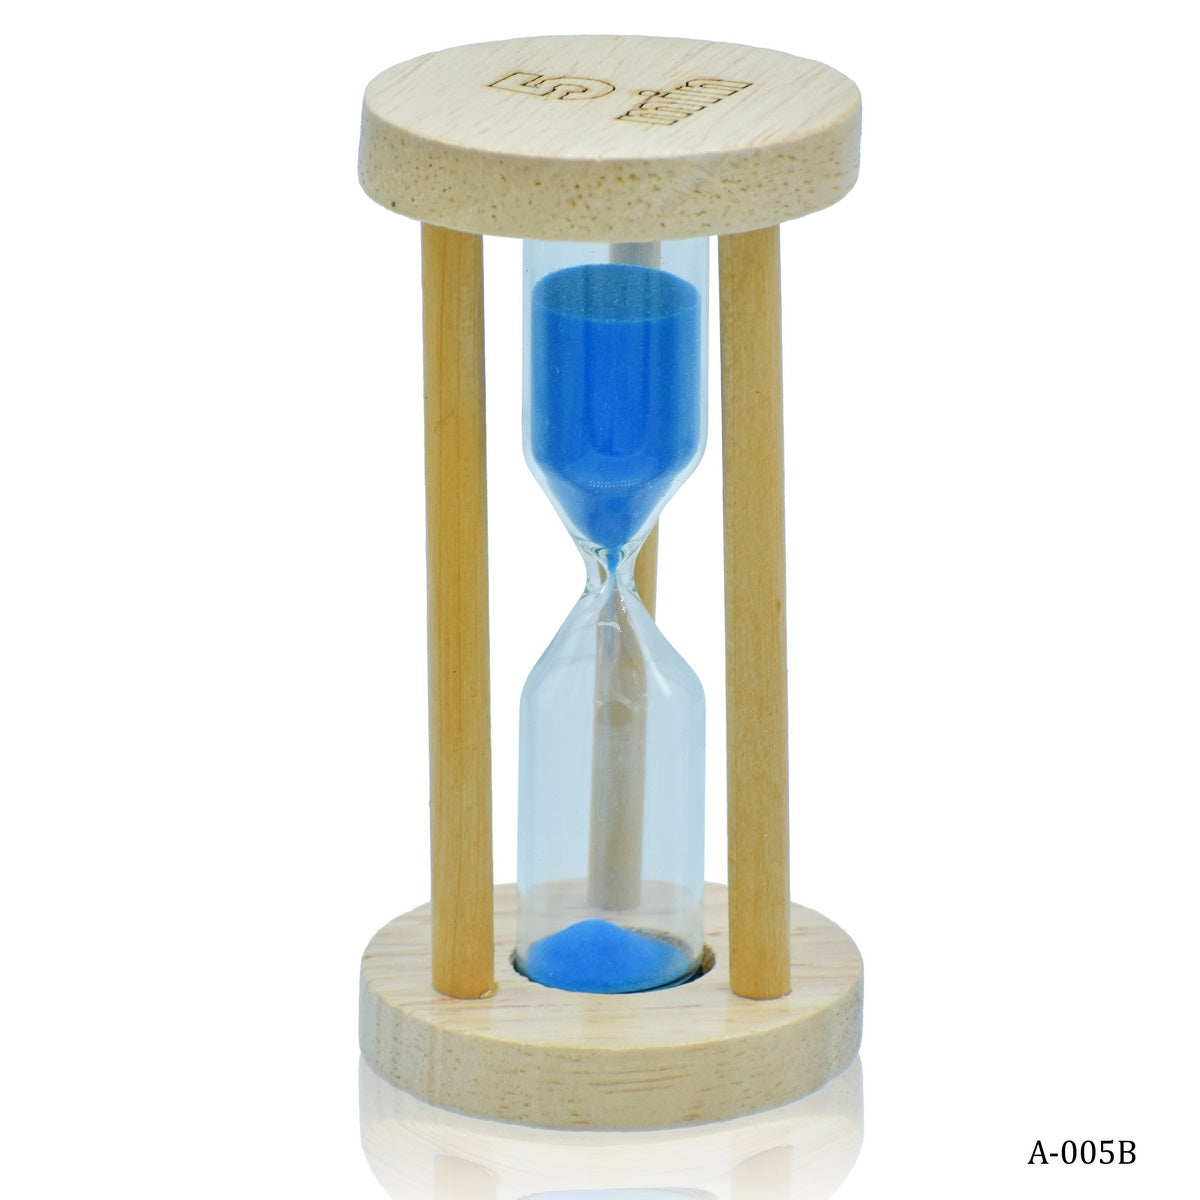 jags-mumbai Sand & Clock Timers Sand Timer Wooden Round Model 5 Minutes A-005B